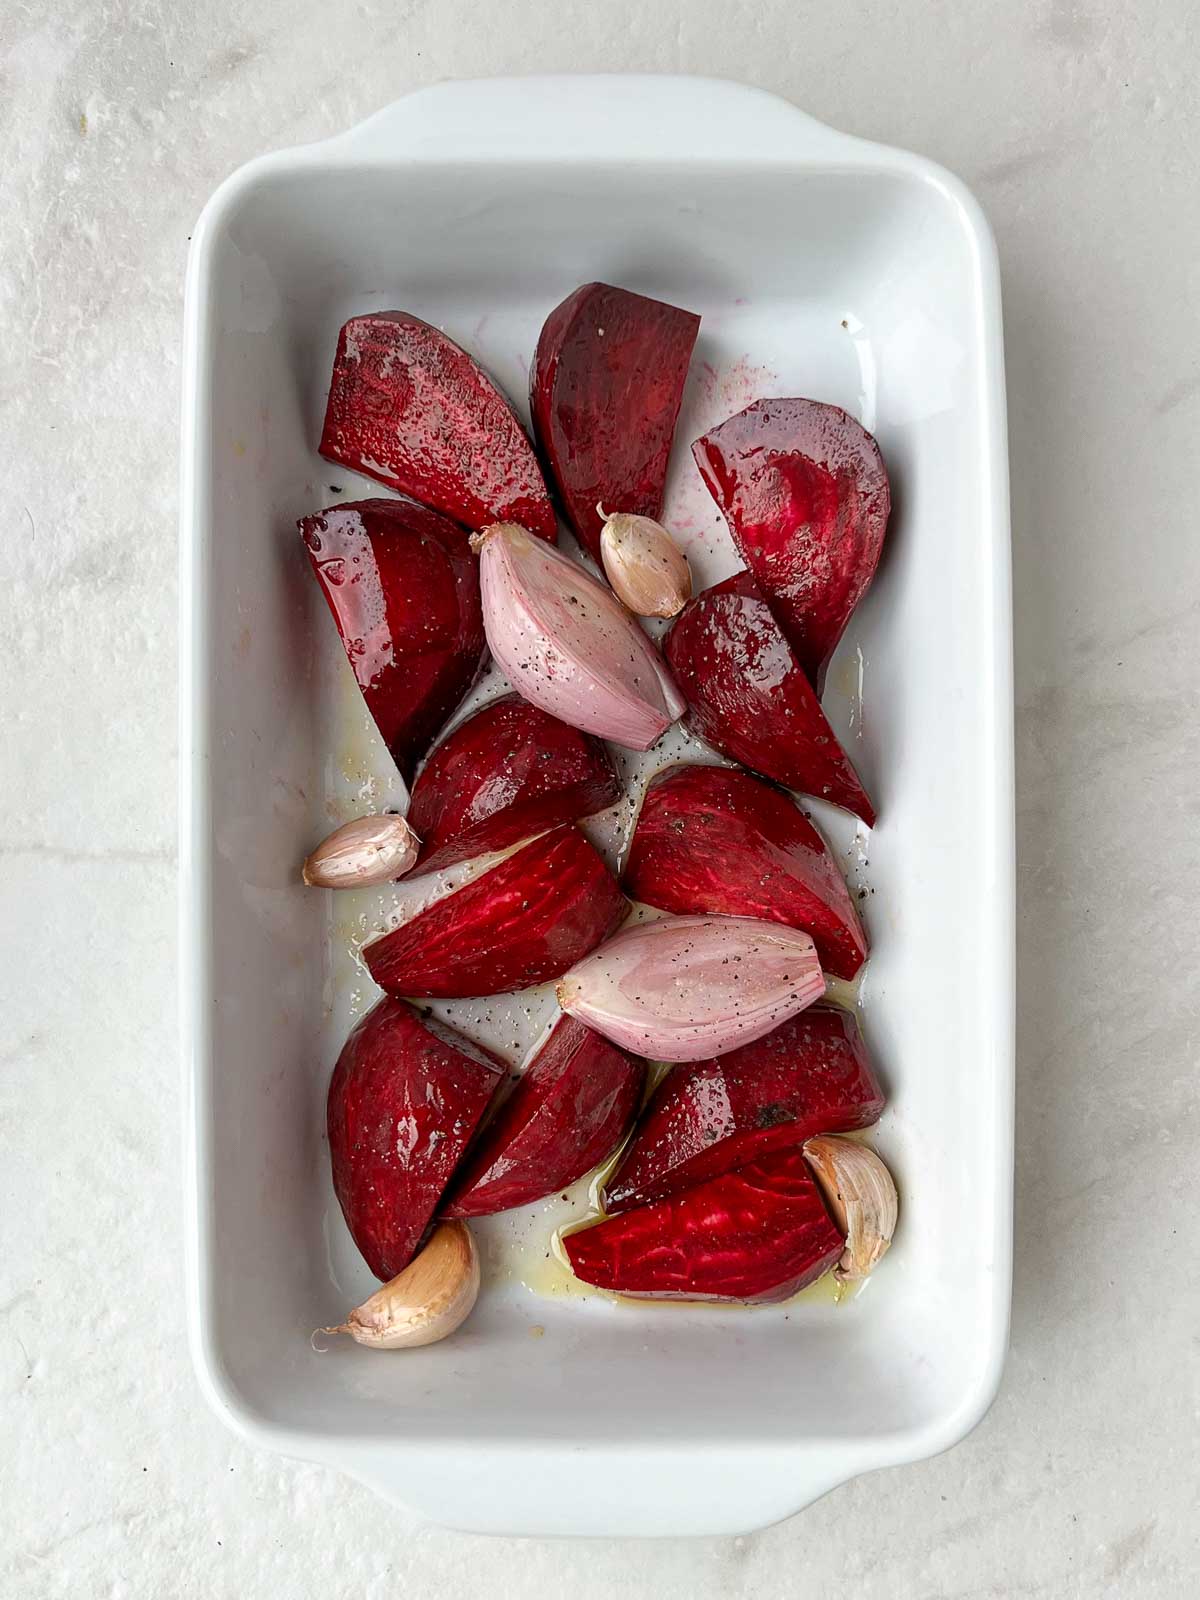 Raw beets, shallot, and garlic in olive oil in a white baking dish.